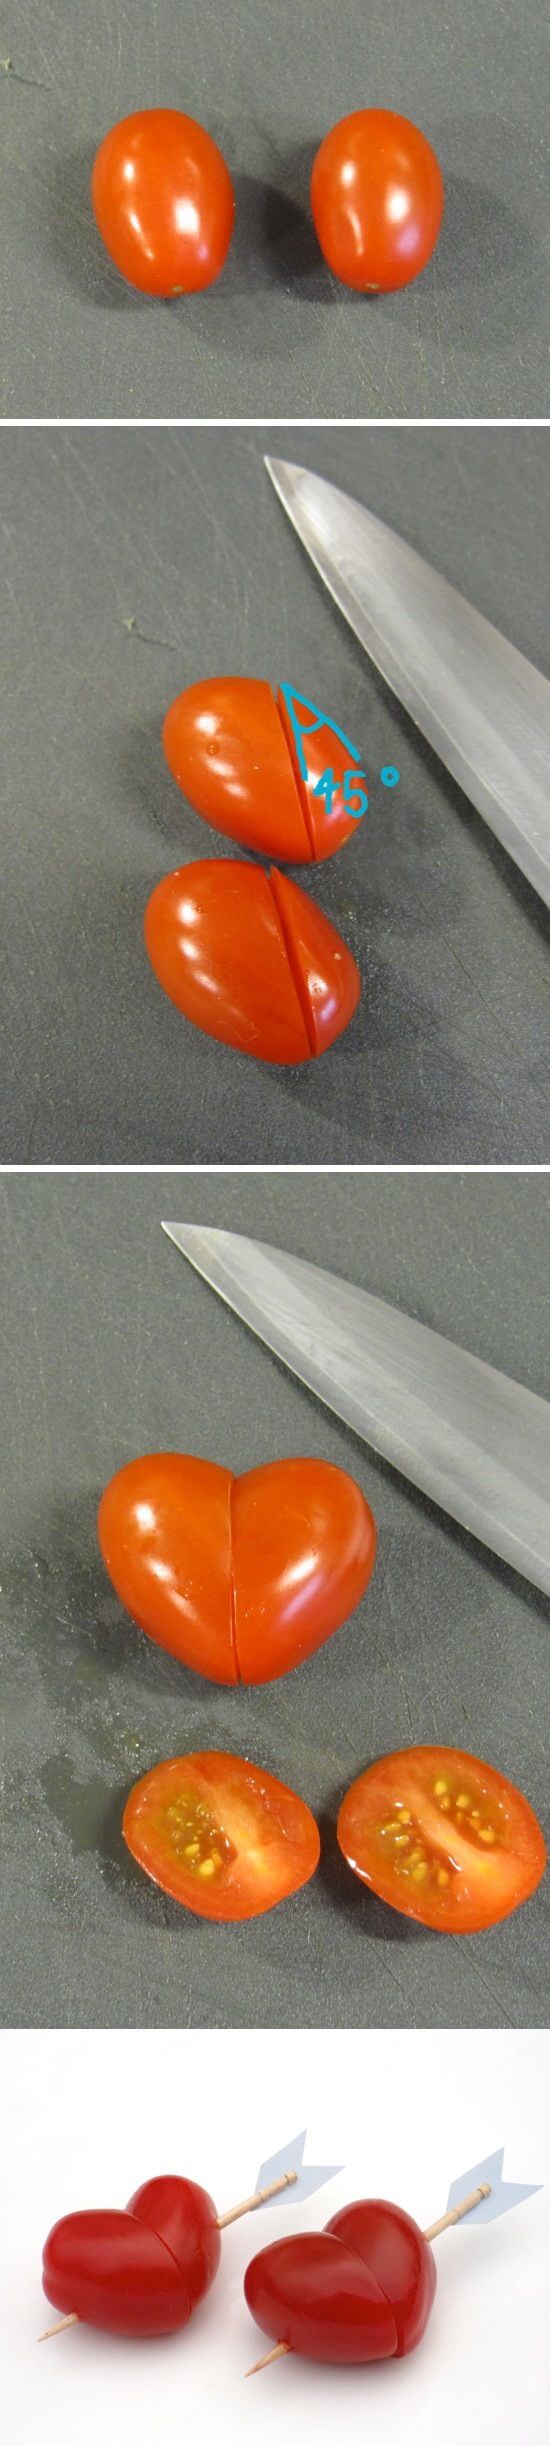 Cherry tomato hearts | Heart-Shaped Crafts For Valentine's Day